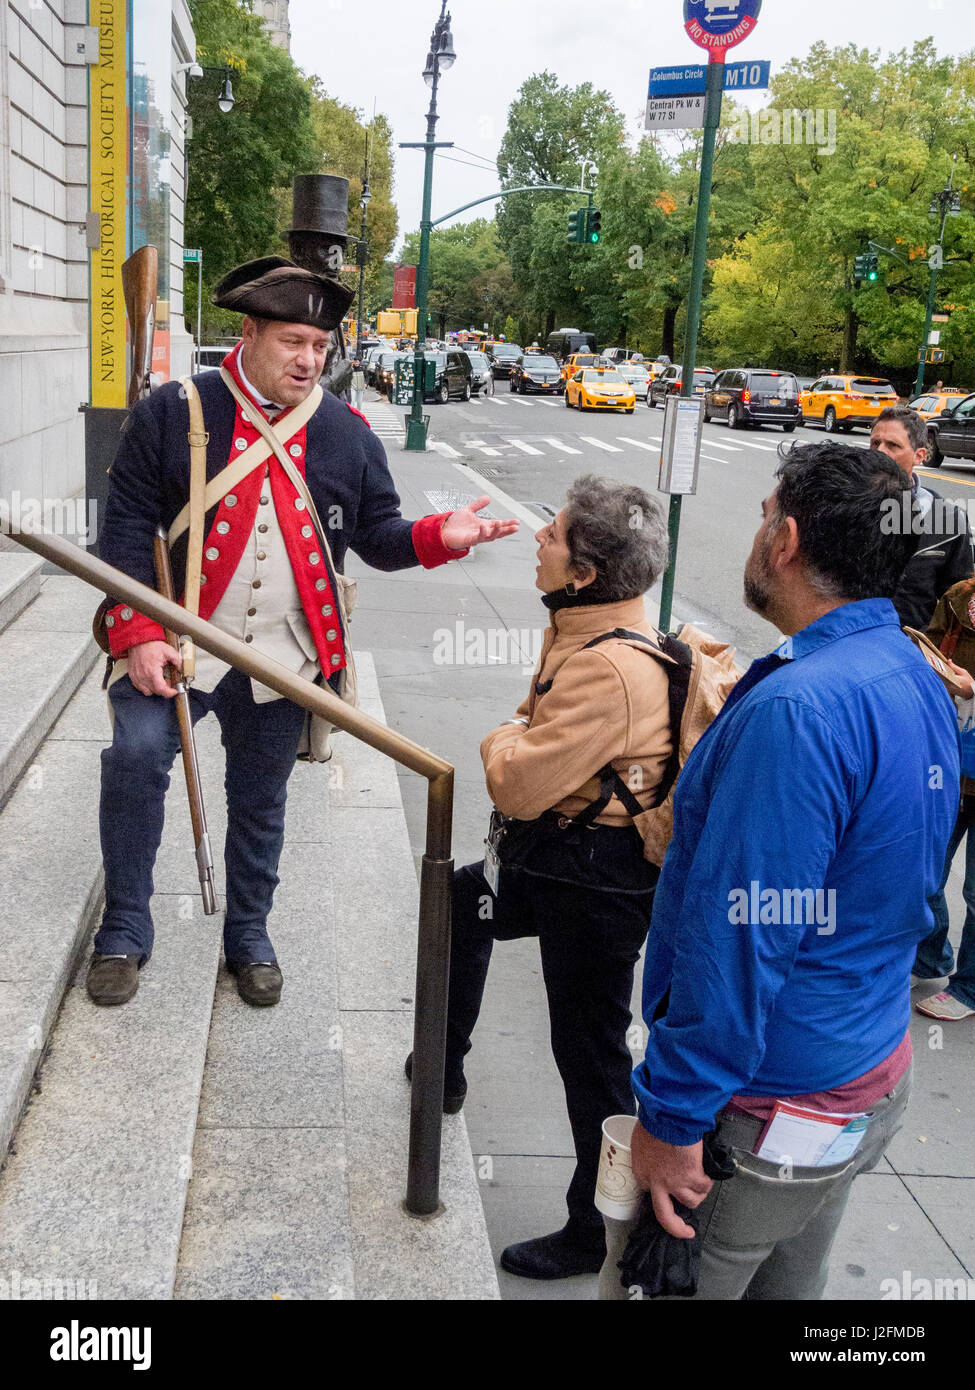 Wearing the uniform of a Continental soldier in the American Revolution, a docent at the New-York Historical Society museum in New York City explains a current exhibit on the Revolution to passersby on Central Park West. Stock Photo